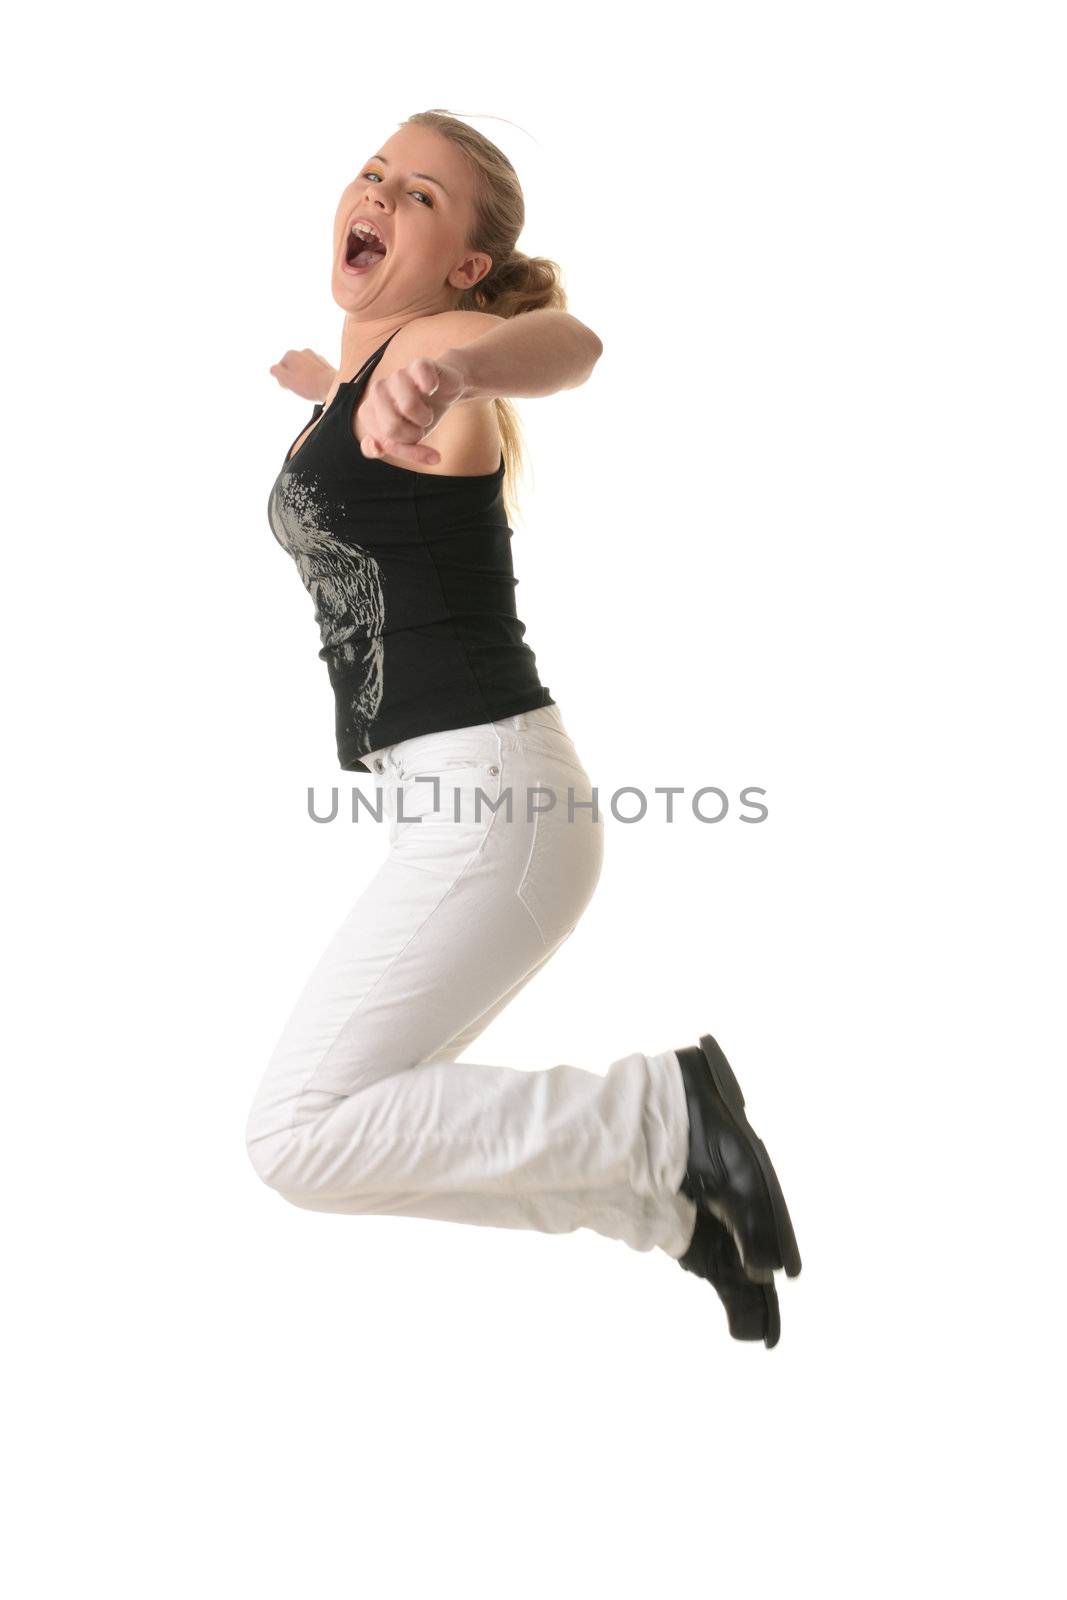 Beautiful woman jumping with joy isolated on white background